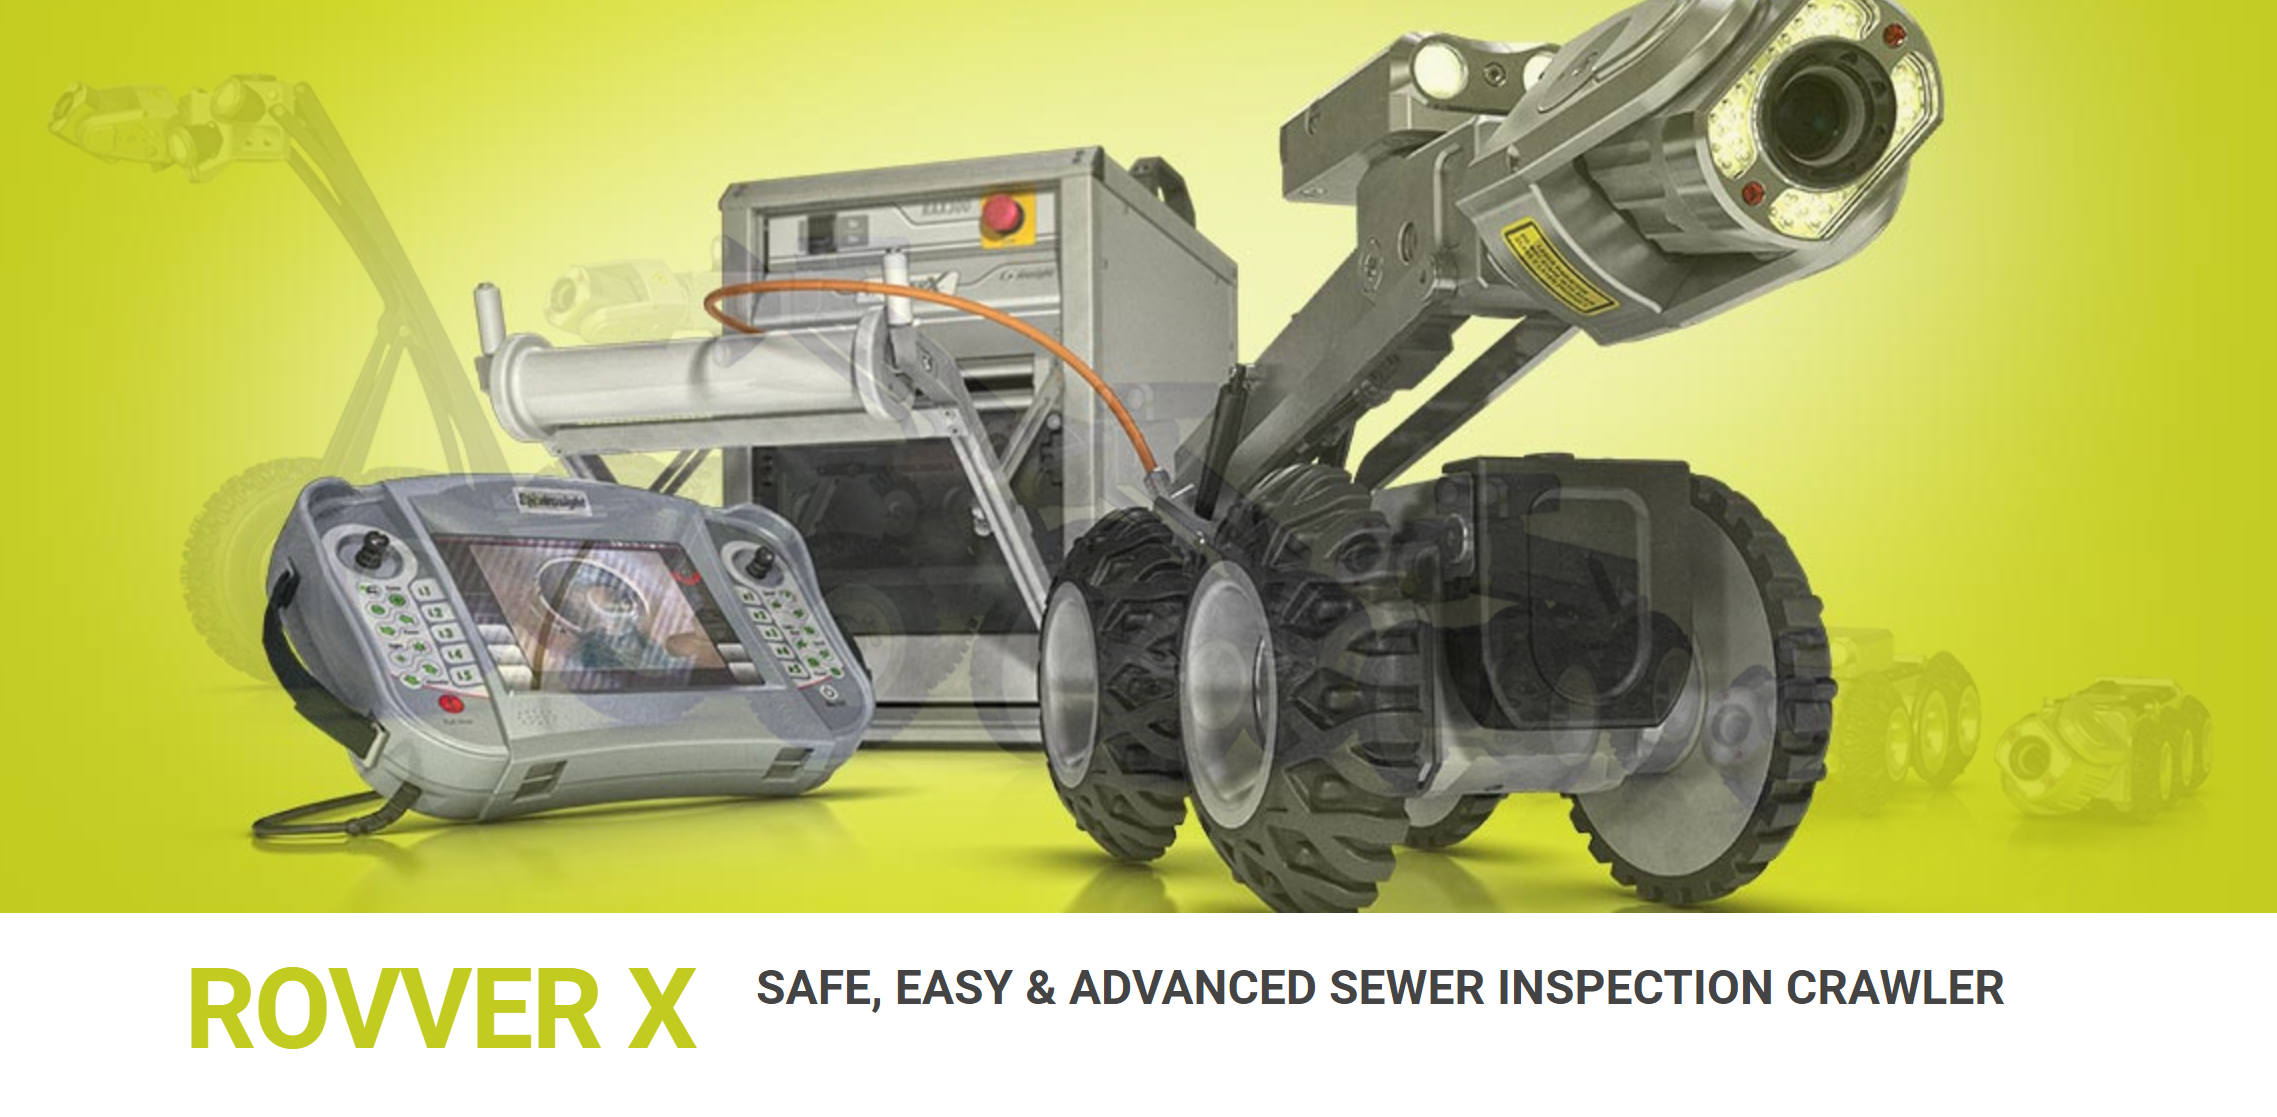 Rovver X - safe, easy and advanced sewer inspection crawler.